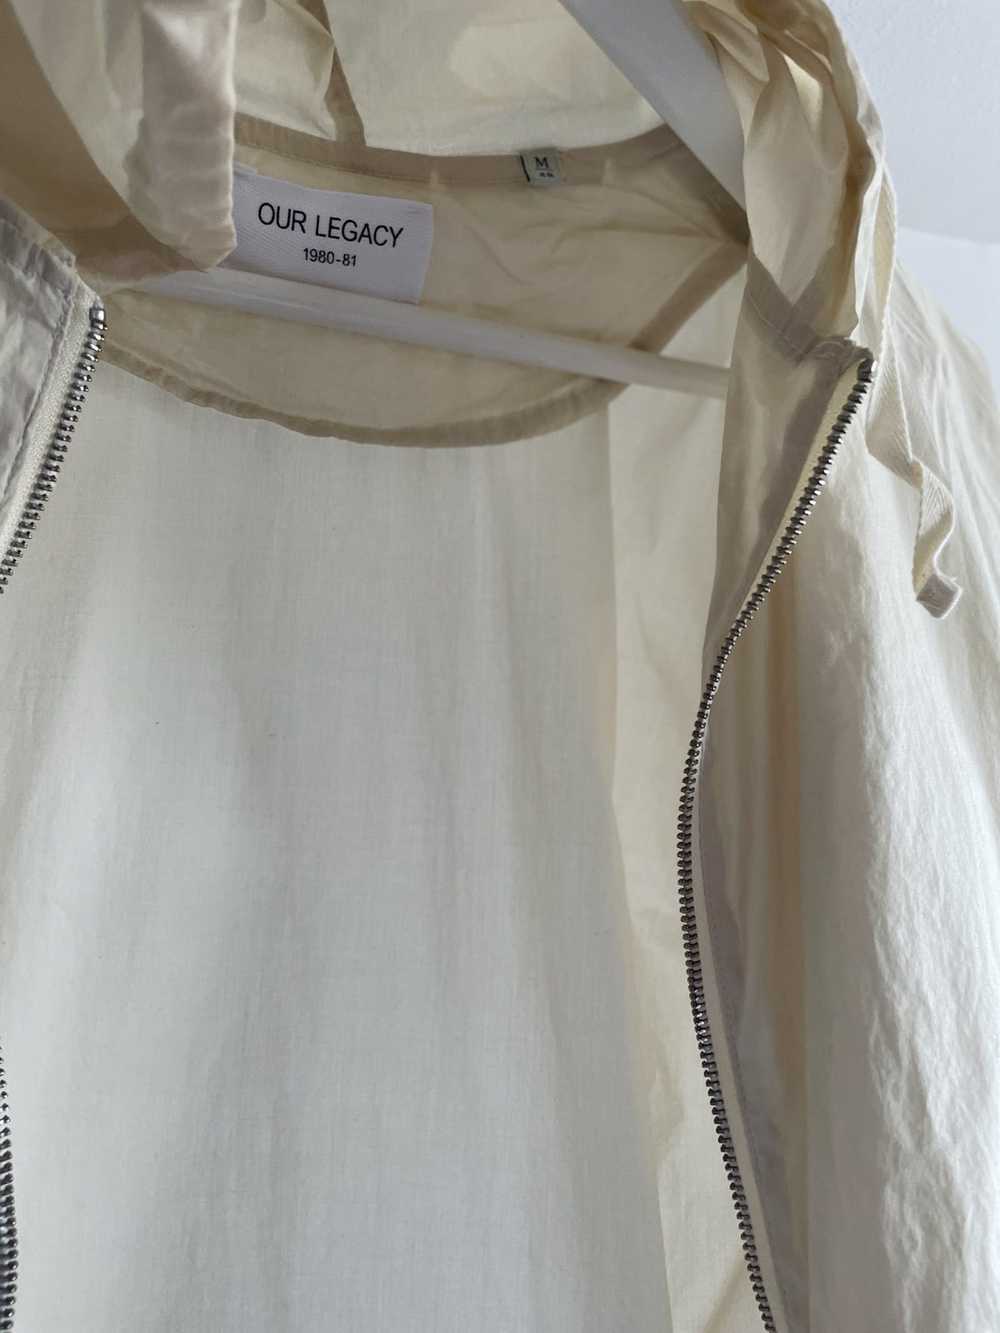 Our Legacy Creamy Paper Windbreaker - image 2